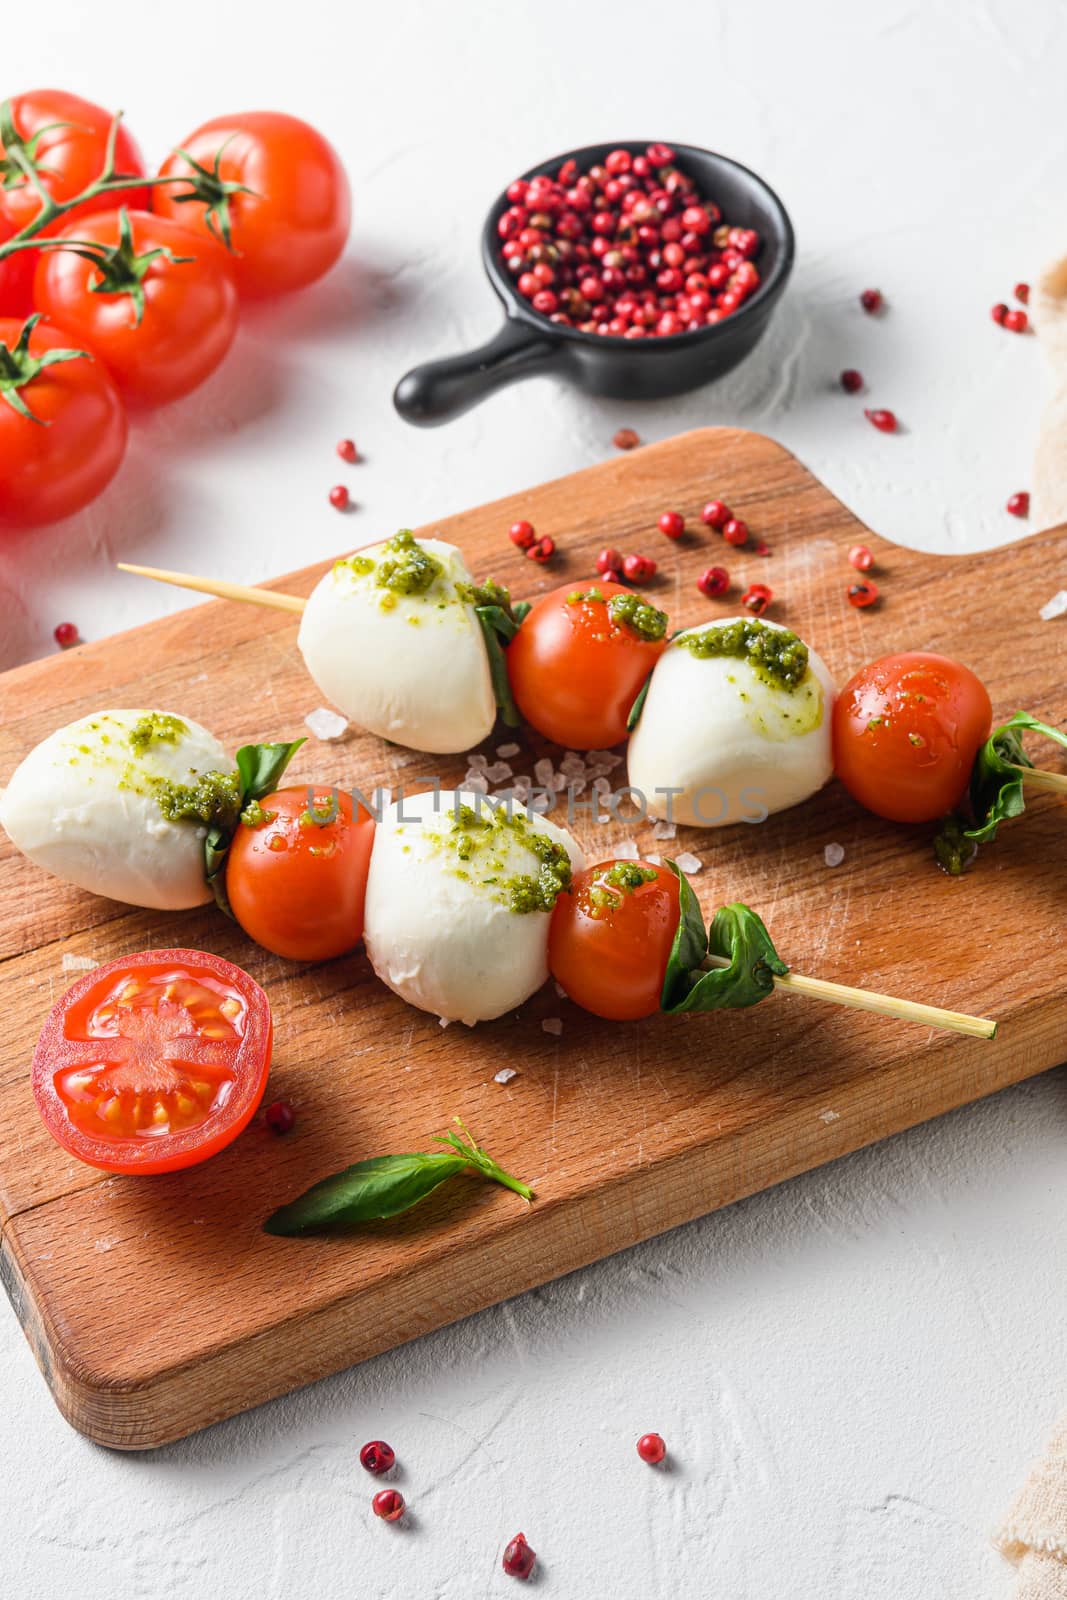 talian food - caprese salad - skewer with tomato, mozzarella and basil, pesto sauce, mediterranean diet concept on old chopping board and linen cloth top view vertical selective focus with ingredients.